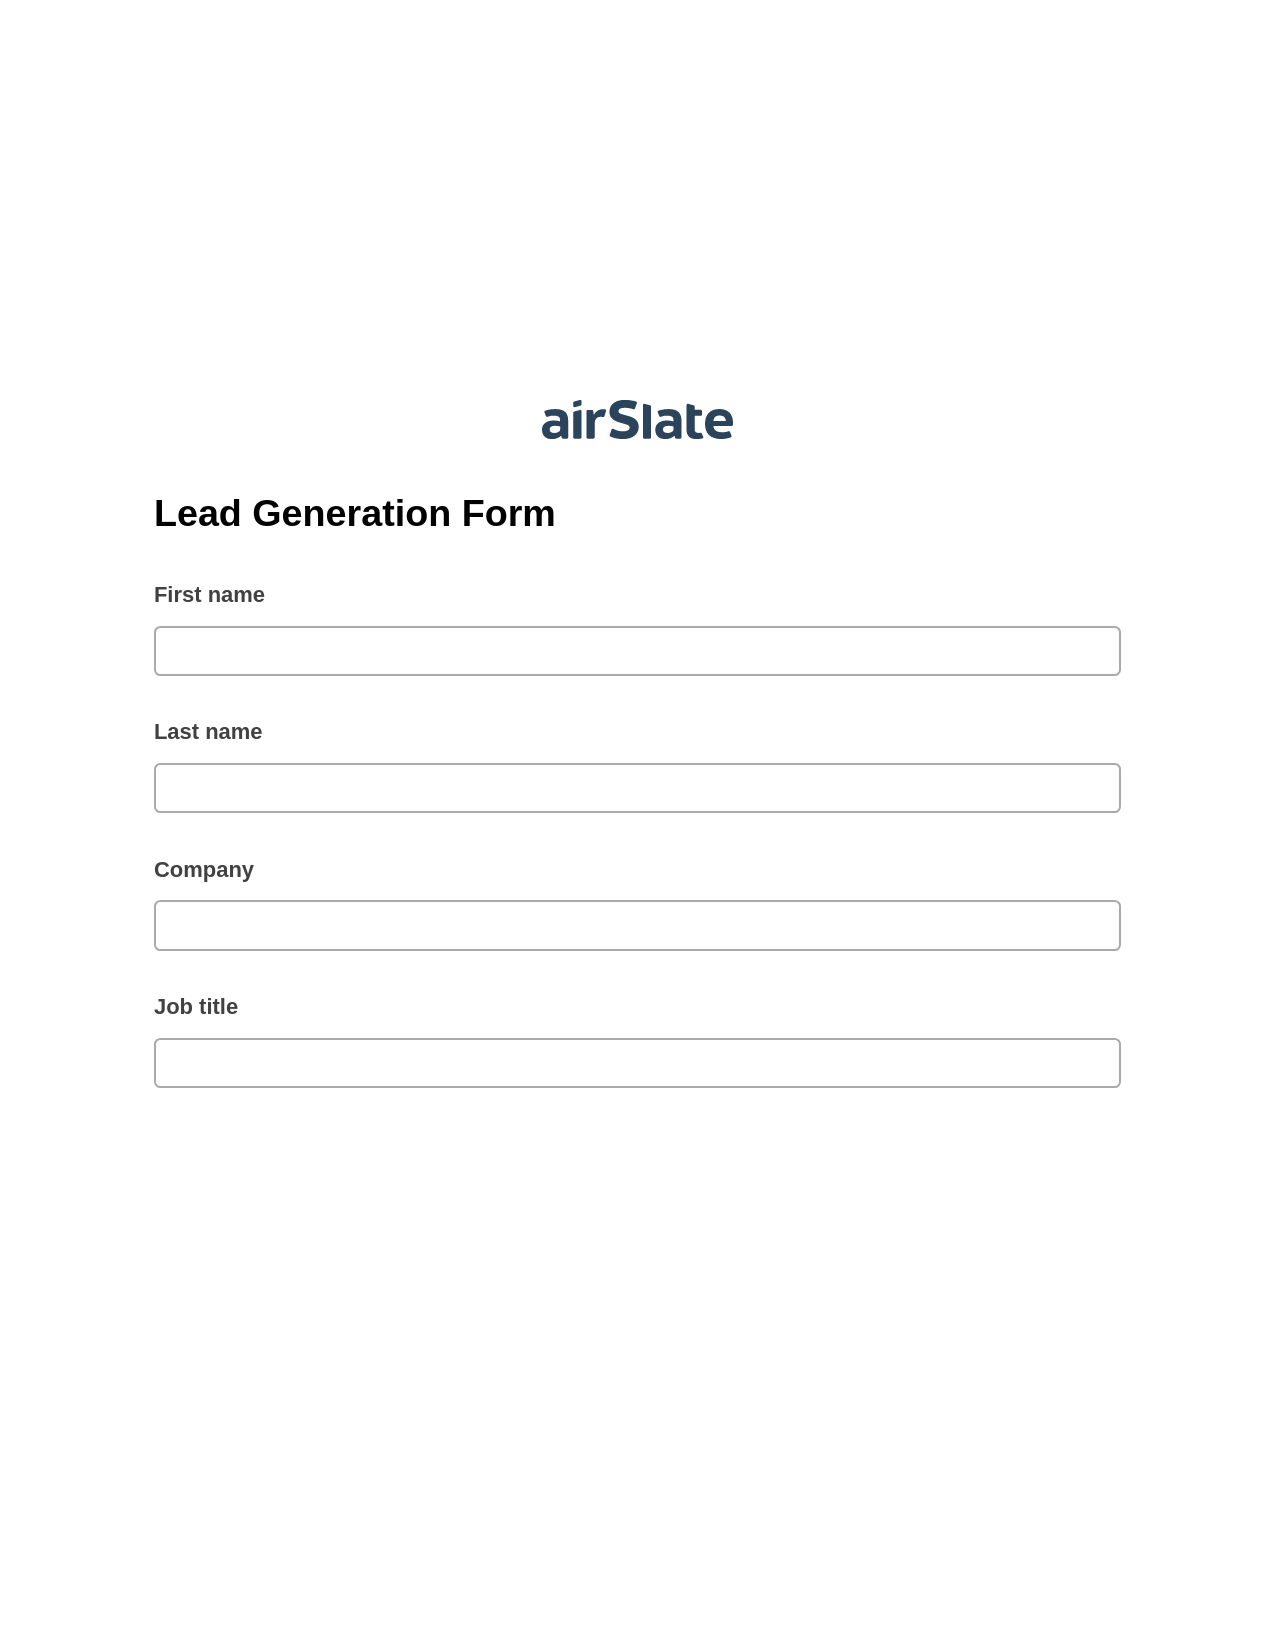 Multirole Lead Generation Form Pre-fill from Google Sheets Bot, Remove Tags From Slate Bot, Archive to Google Drive Bot